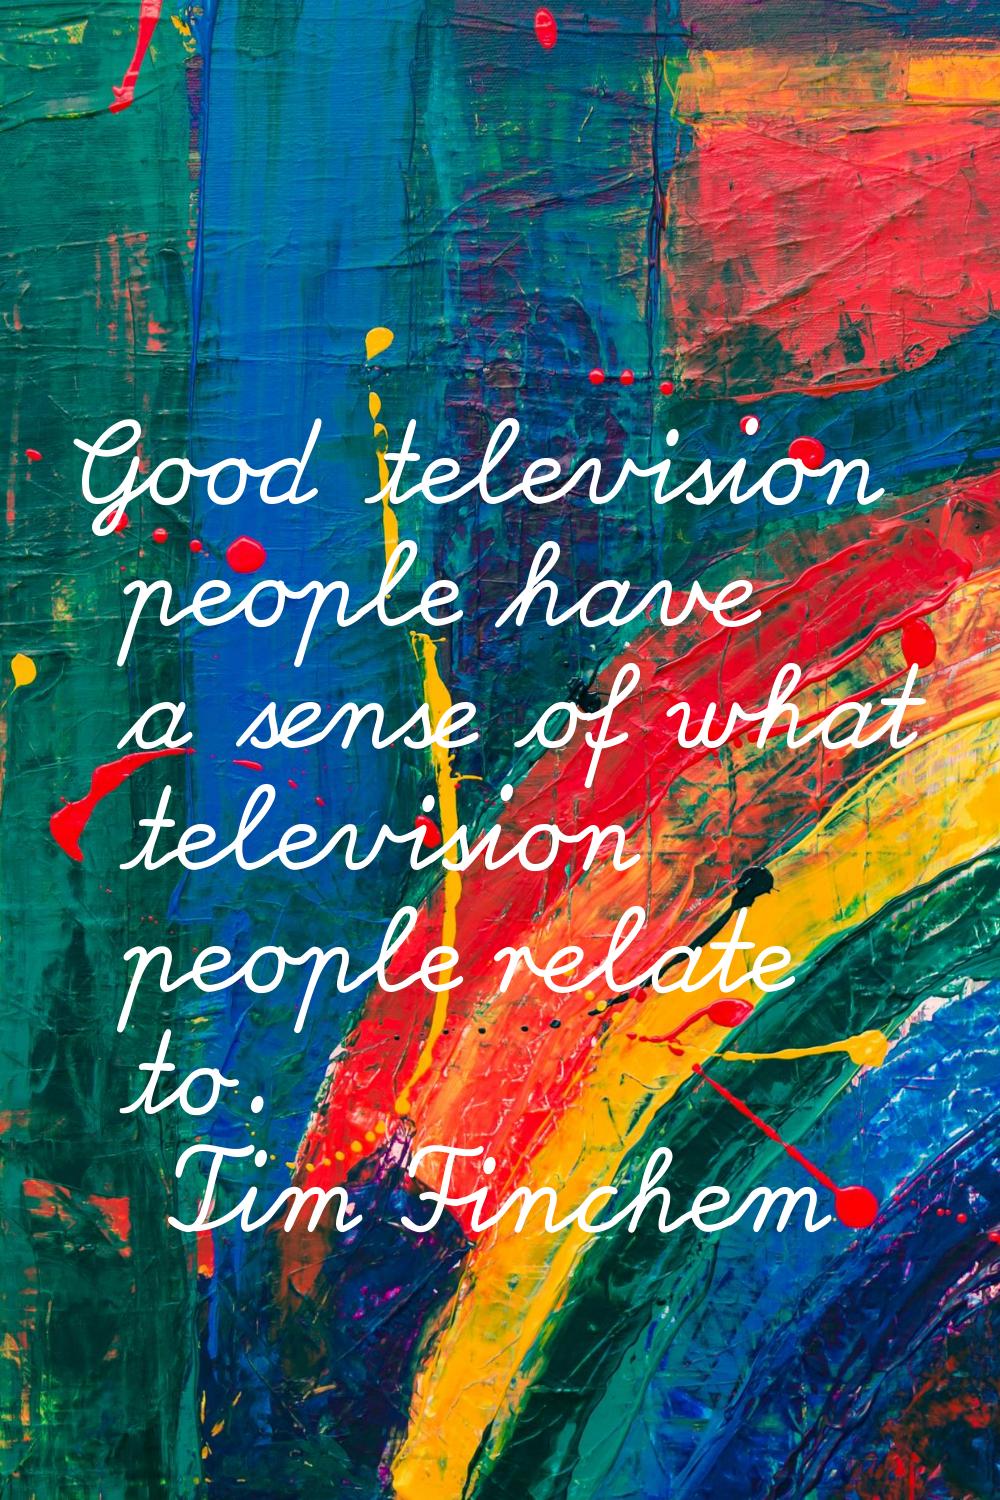 Good television people have a sense of what television people relate to.